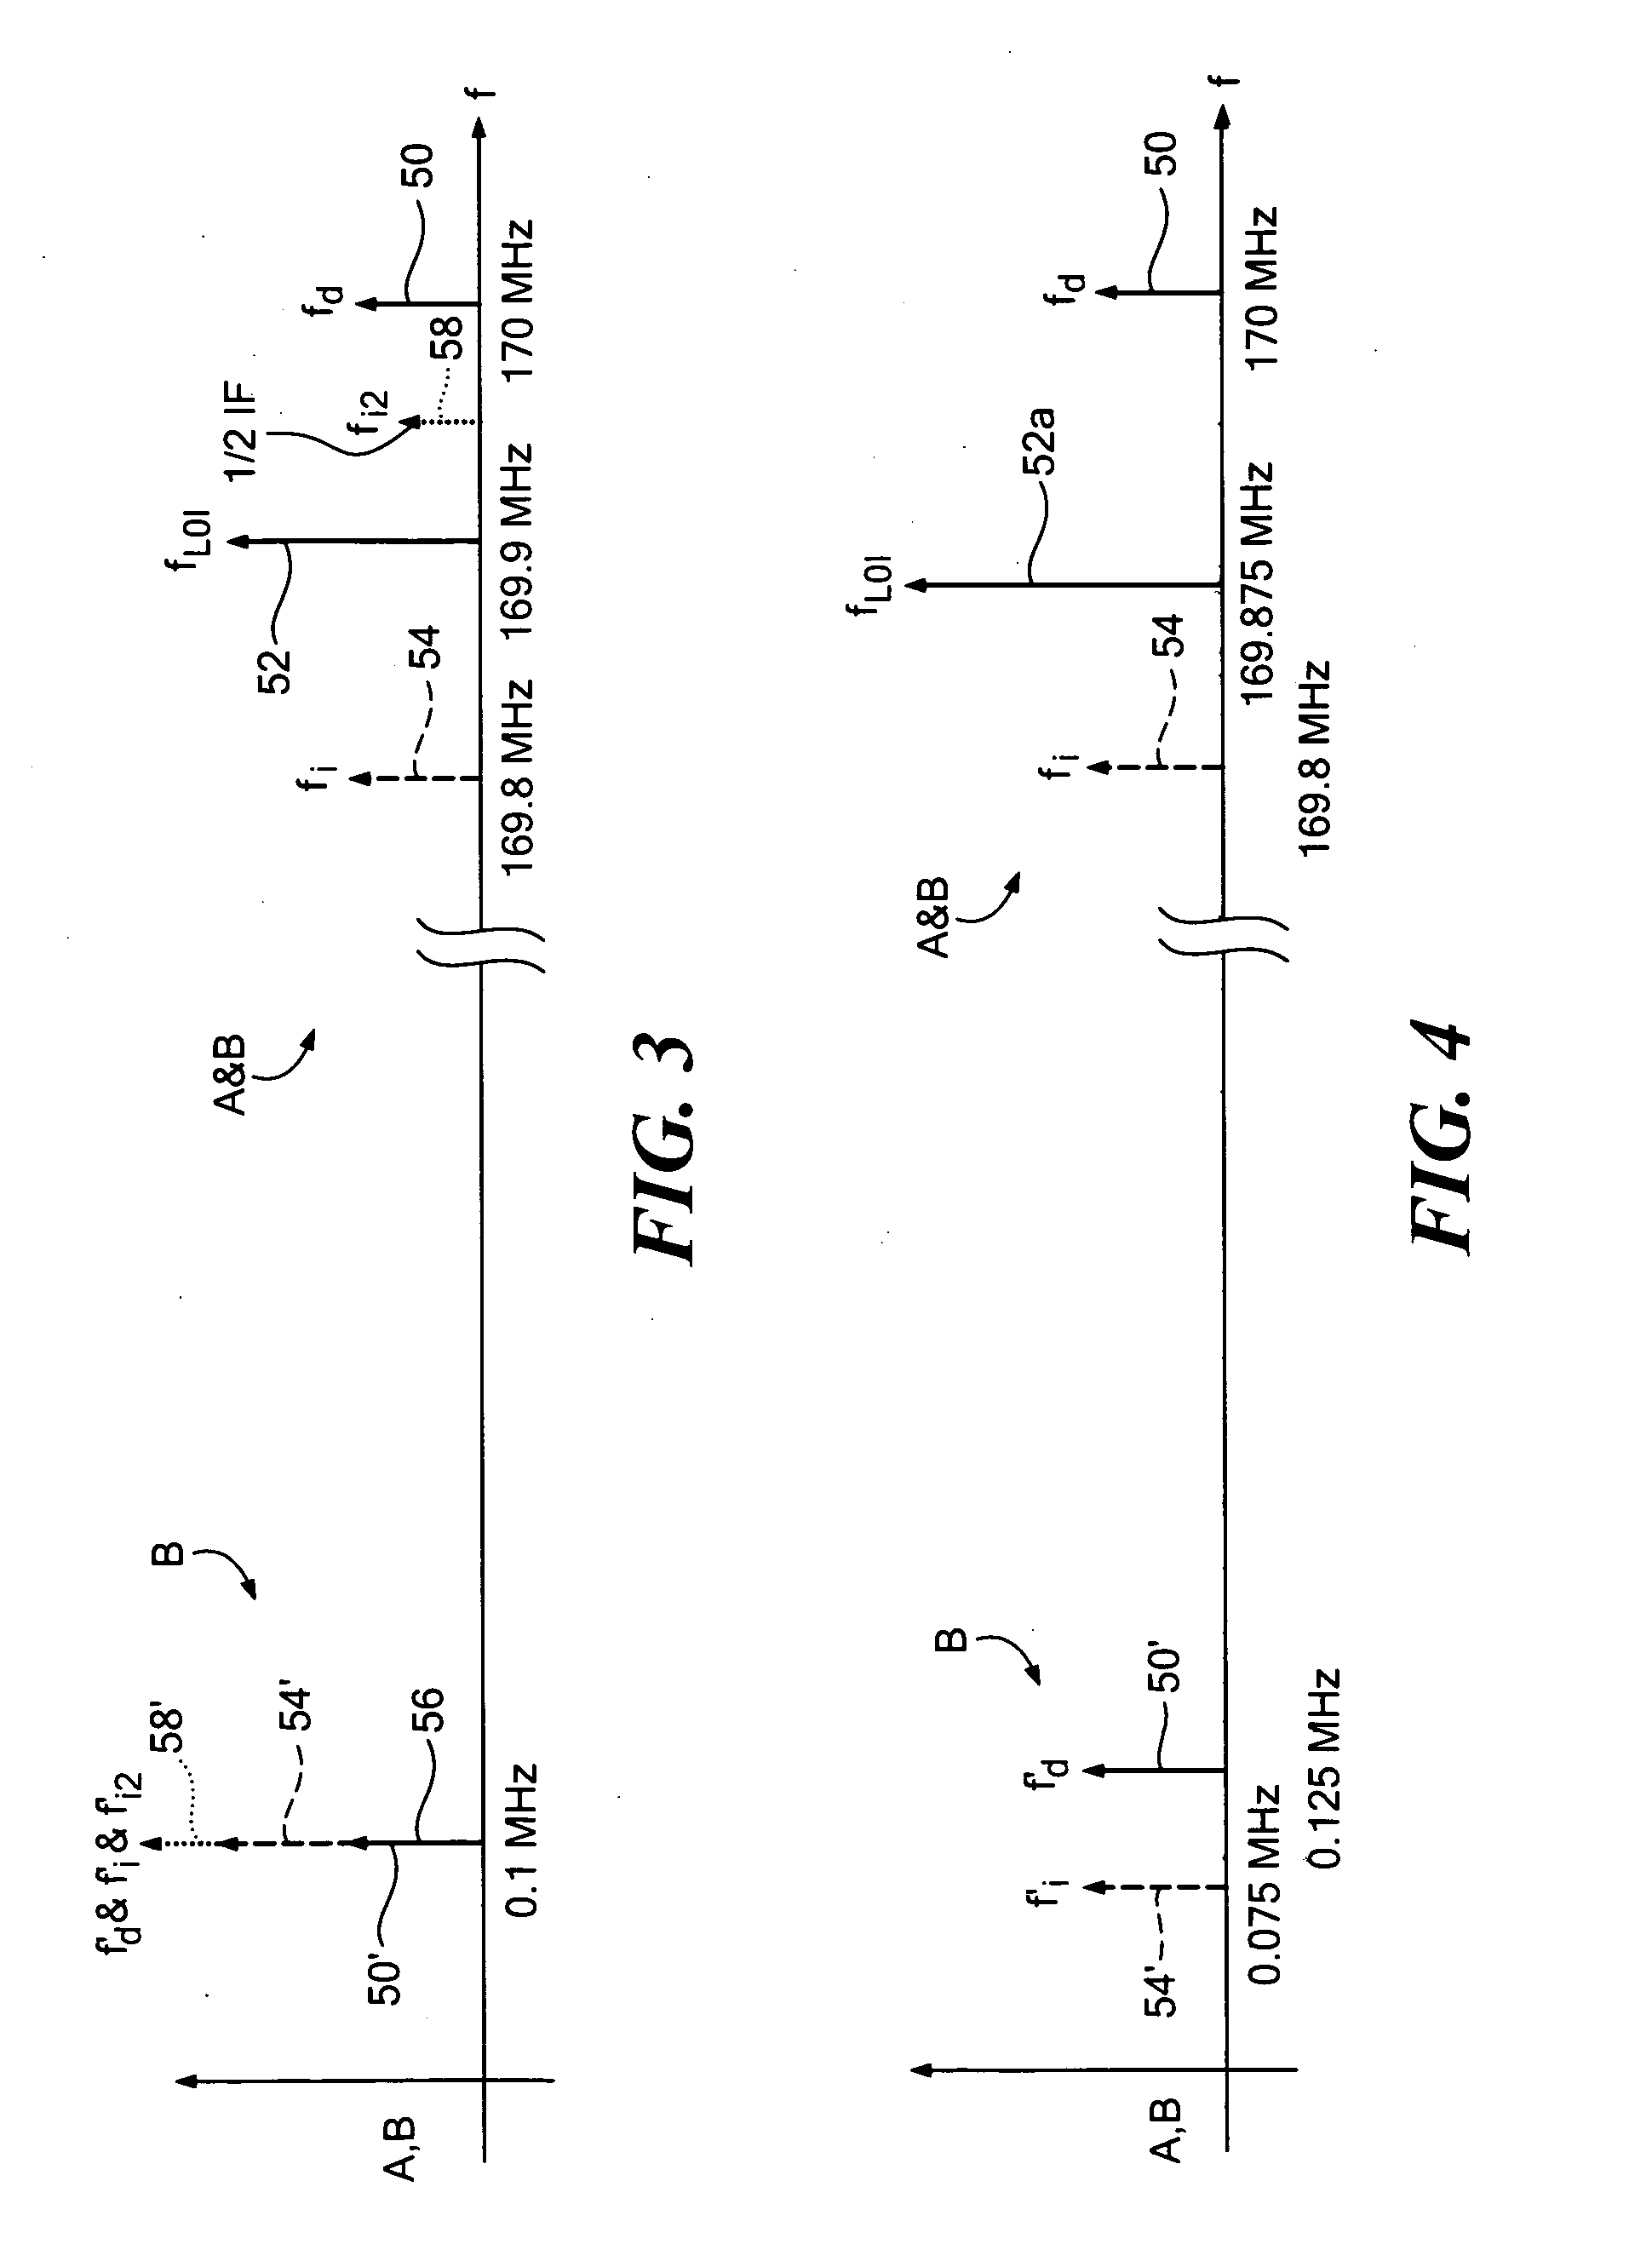 Dynamic, low if, image interference avoidance receiver